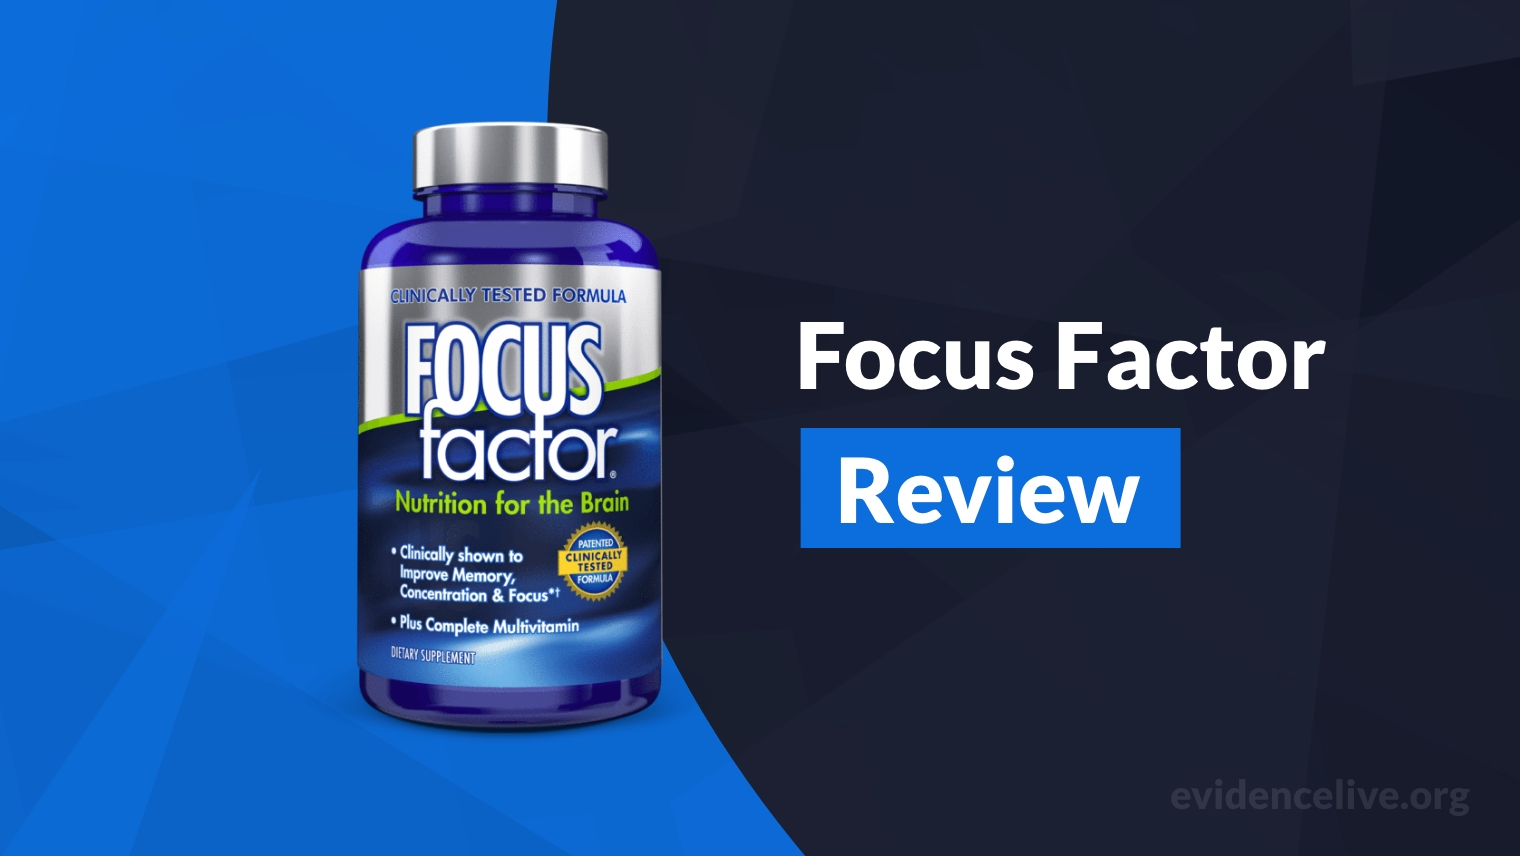 Focus Factor Review: Ingredients, Benefits, and Side Effects